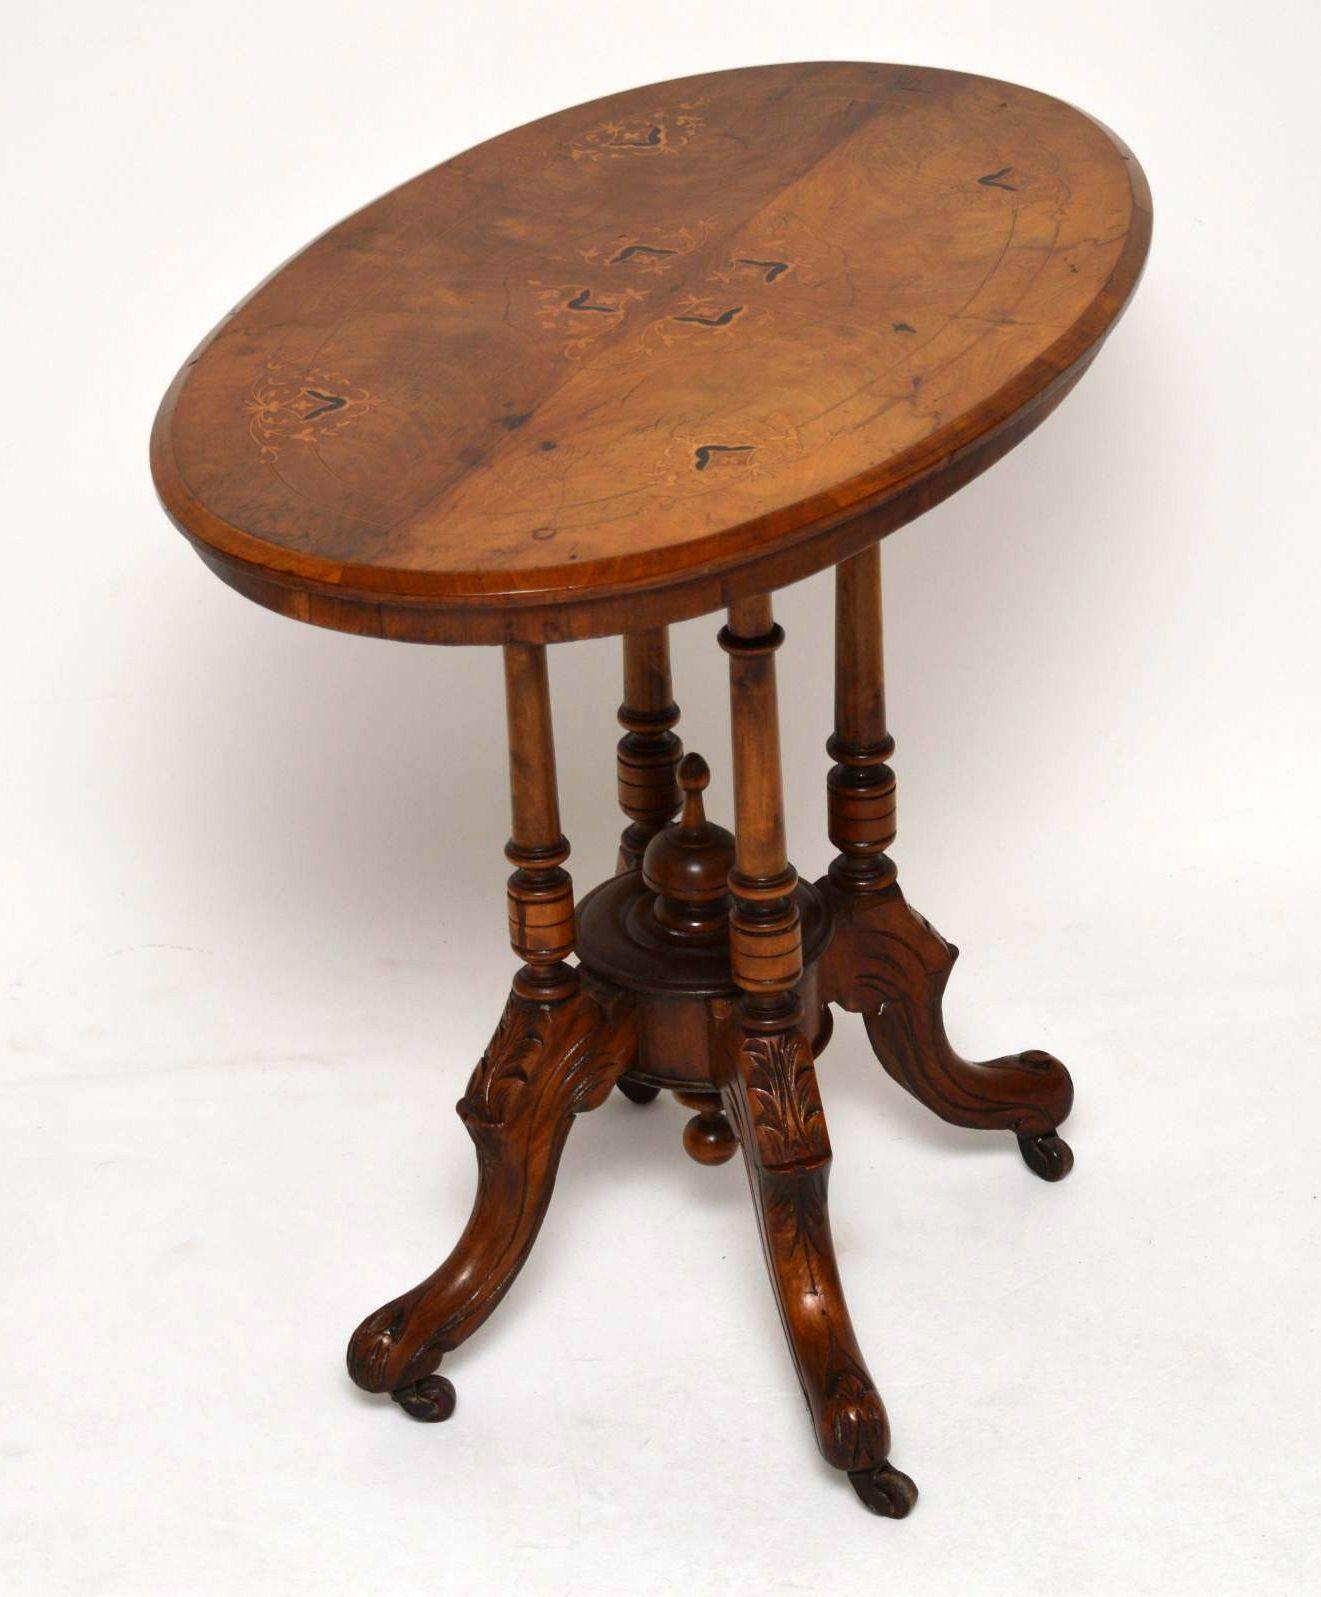 English Antique Victorian Inlaid Walnut Occasional Table